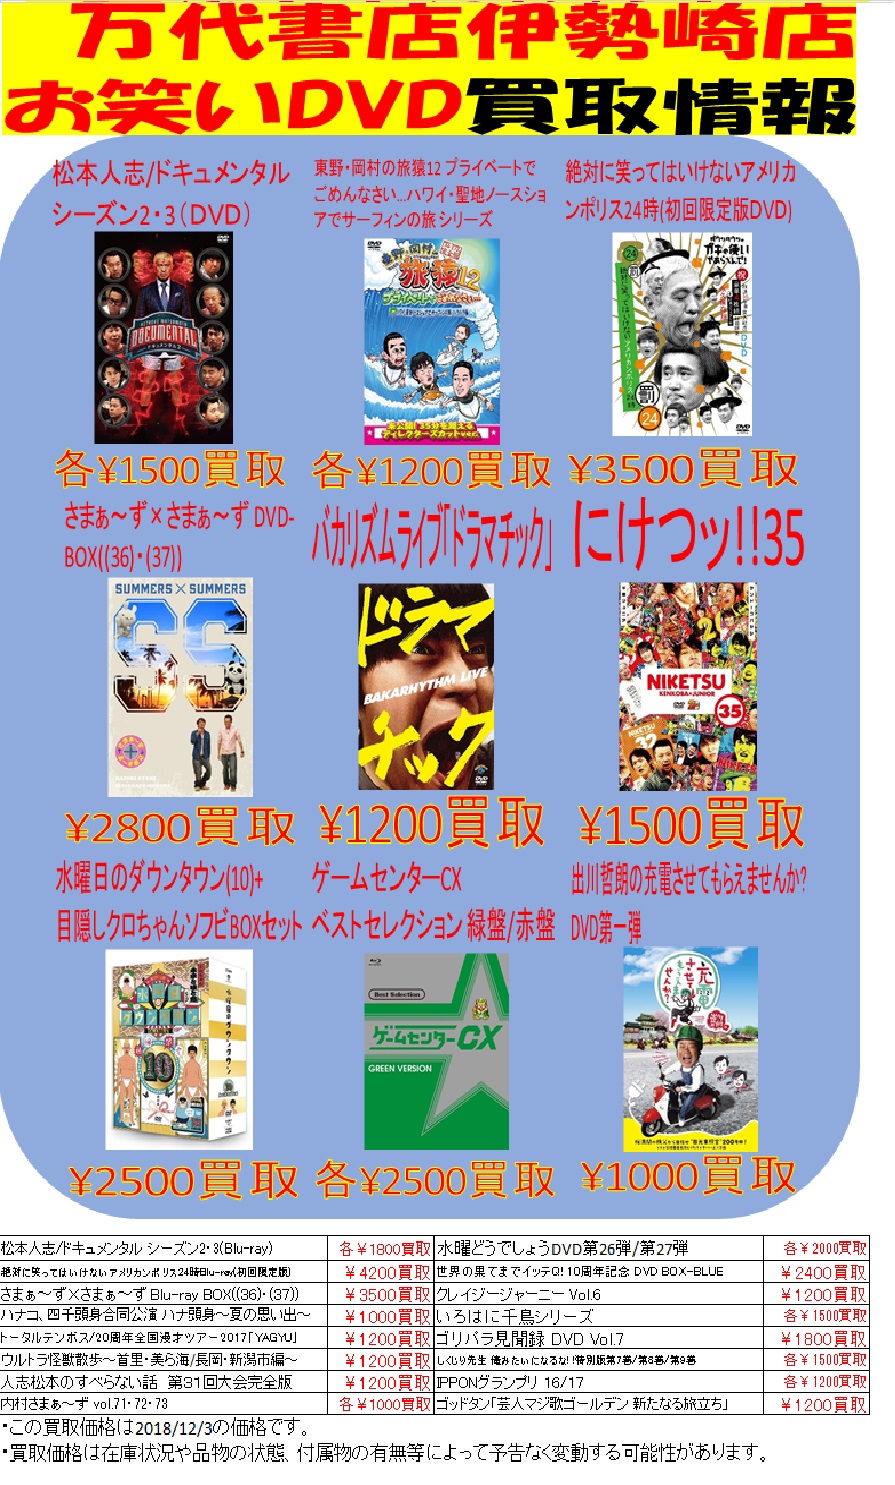 【CD/DVD】12/4お笑いDVD買取ます！！買取情報更新しました(^ ^)/ - 万代書店 伊勢崎店